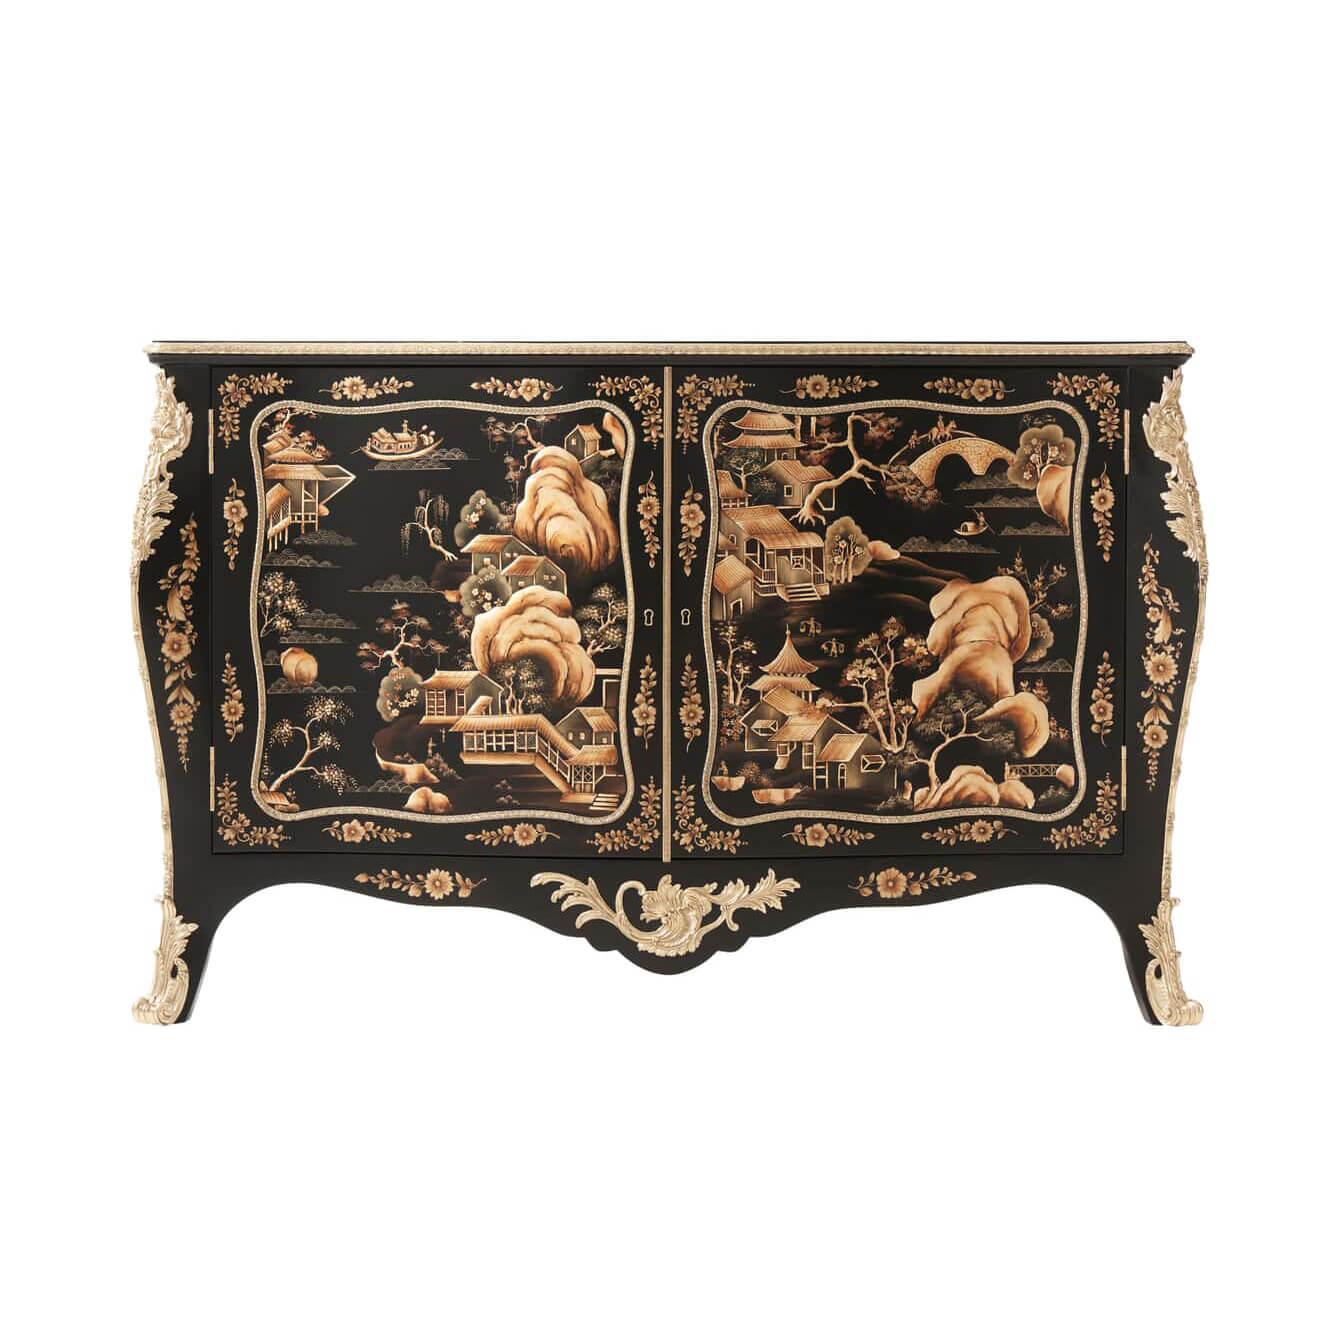 An exceptional black chinoiserie lacquered serpentine commode, the richly hand-painted top of chinoiserie landscapes and floral details above a cast brass floral decorated edge and two finely cast brass molding paneled doors enclosing a burgundy